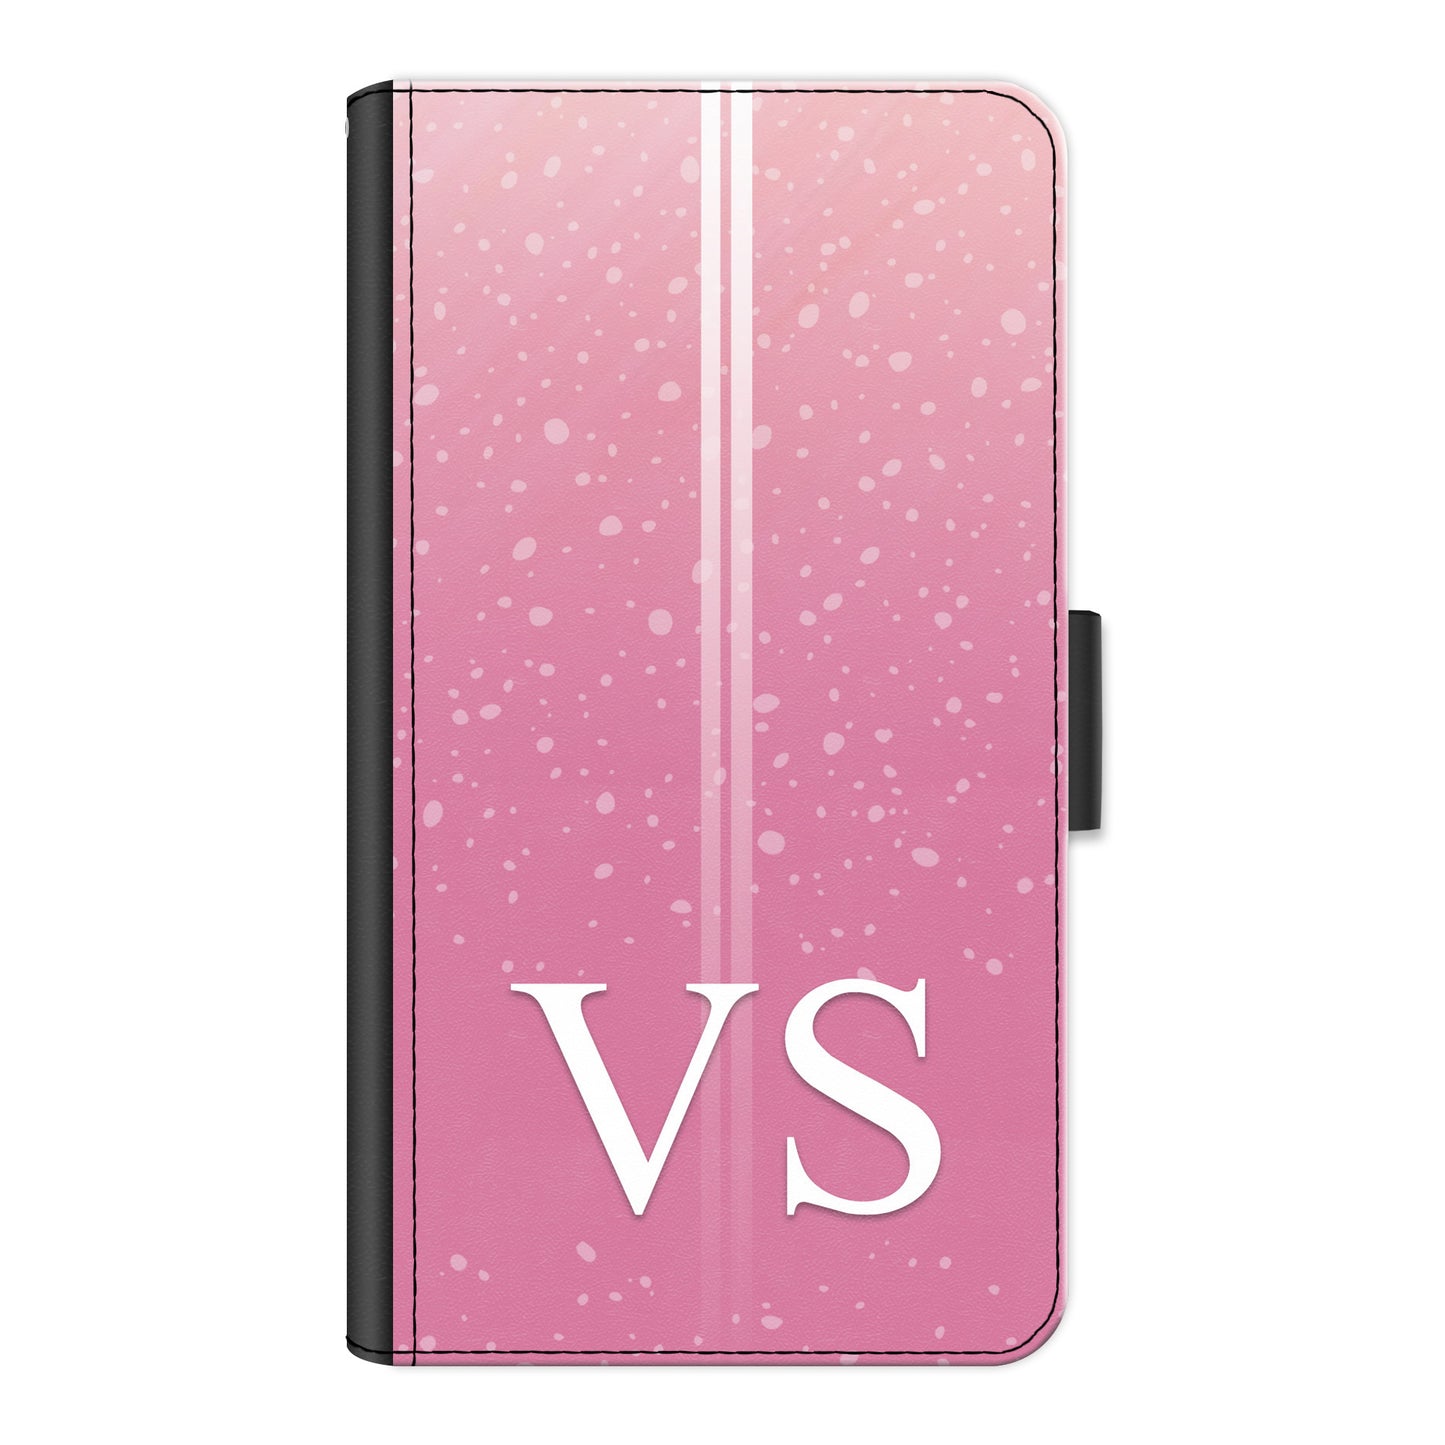 Personalised Oppo Phone Leather Wallet with White Initials, Pin Stripes and Droplets on Pink